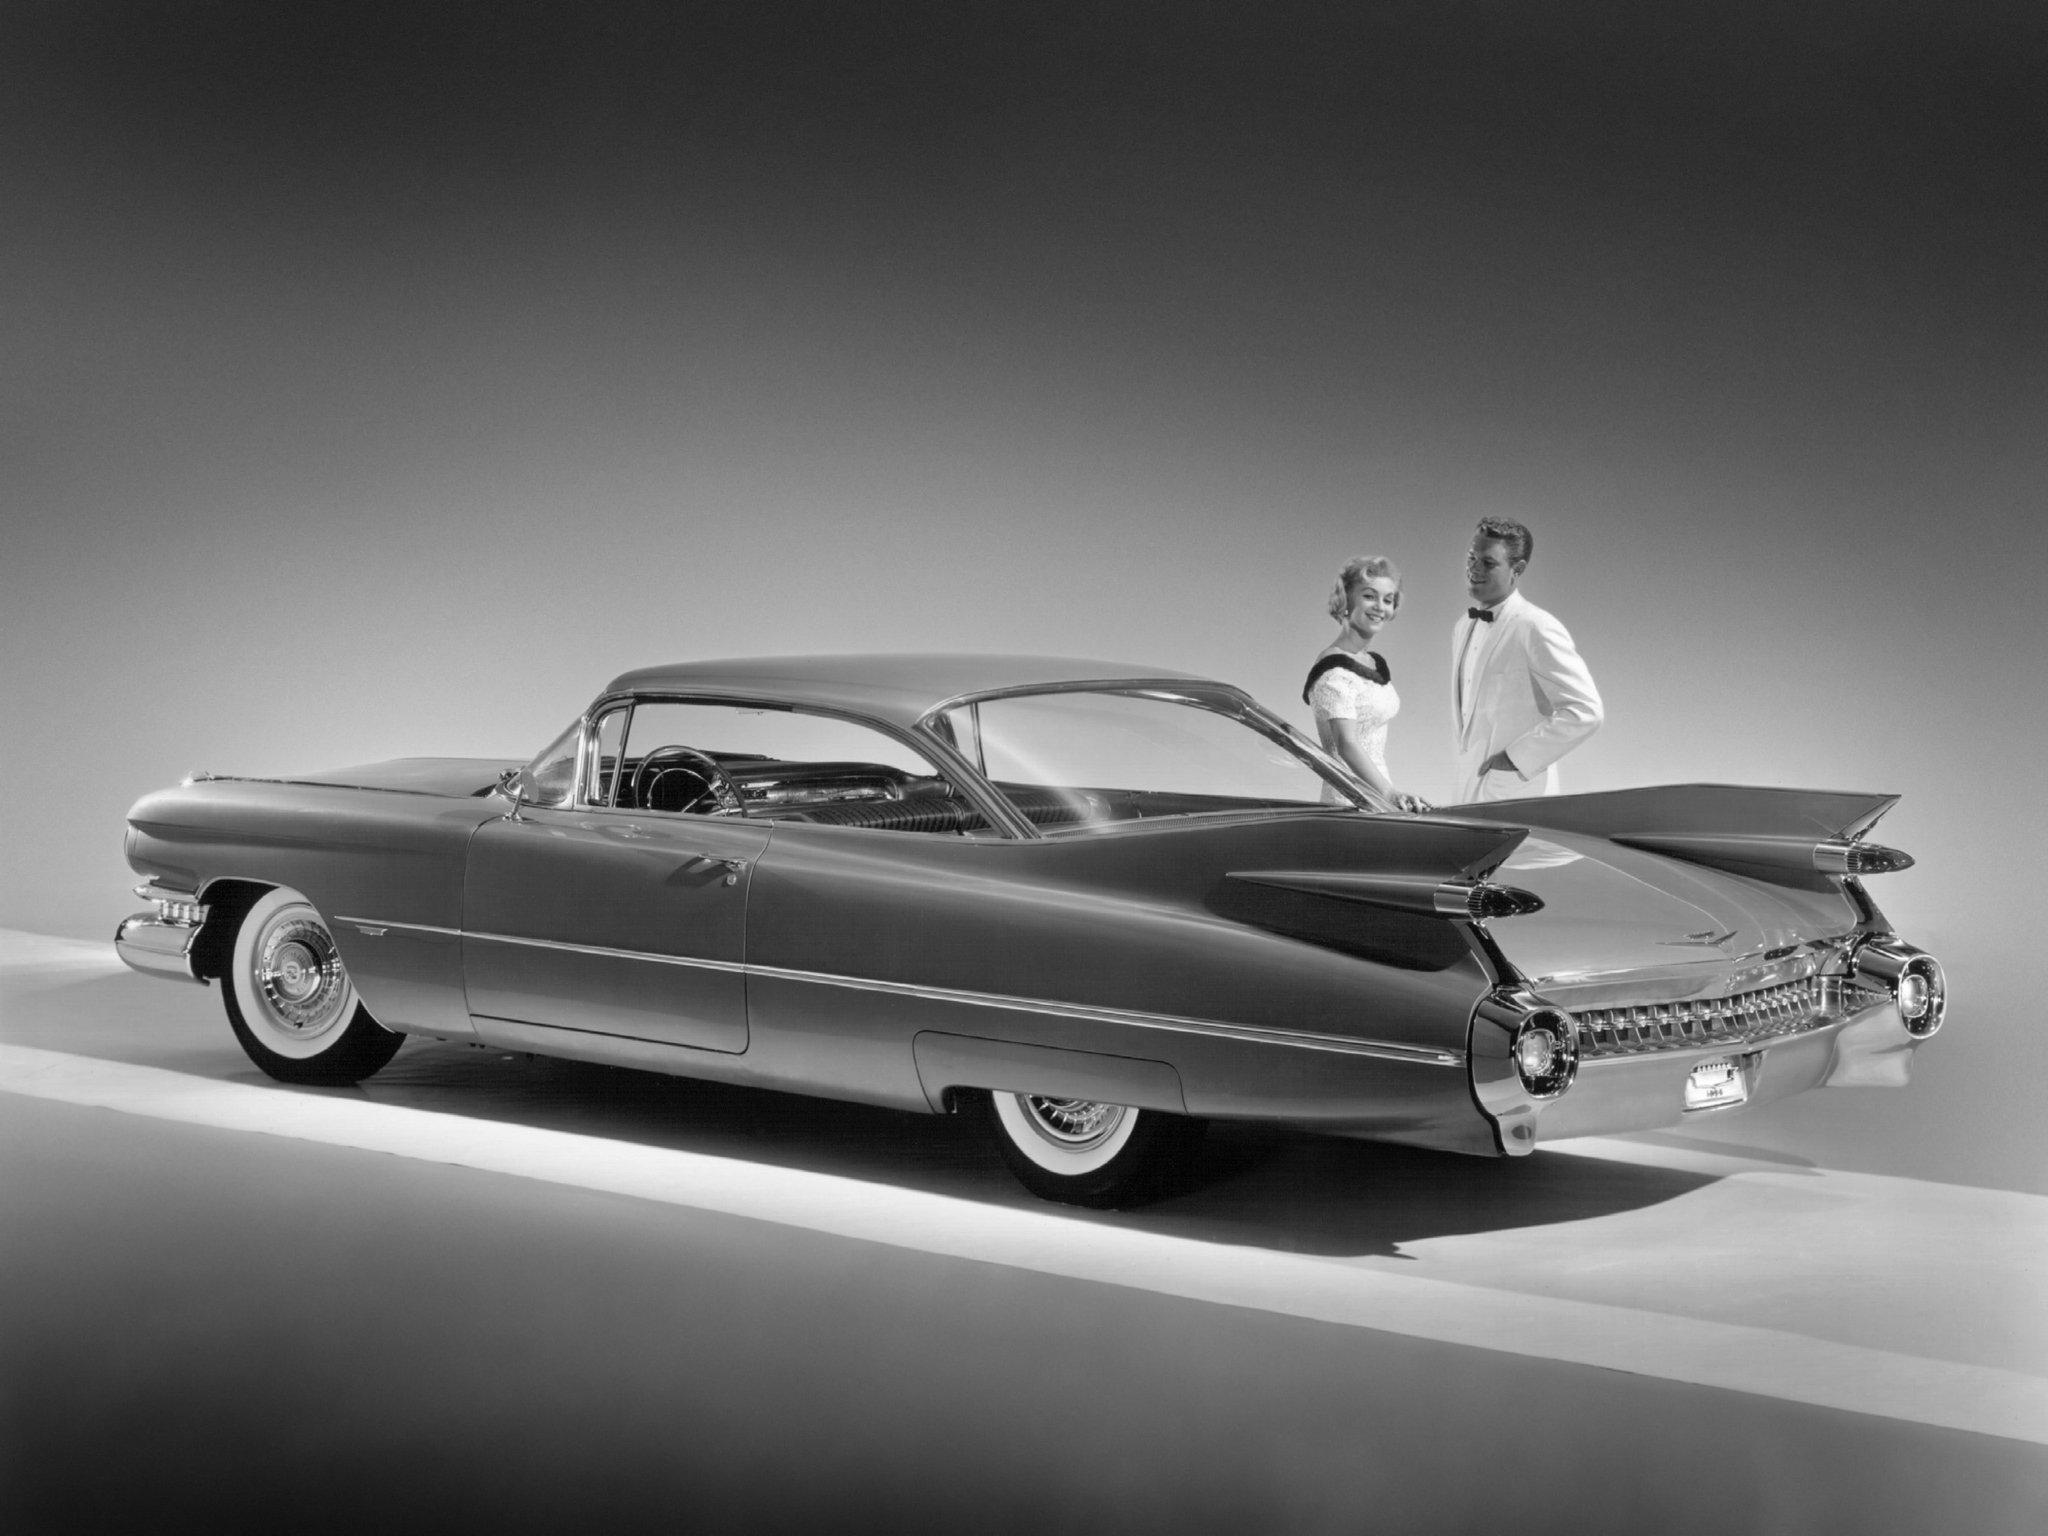 1959, Cadillac, Sixty two, Hardtop, Coupe, Luxury, Retro Wallpaper